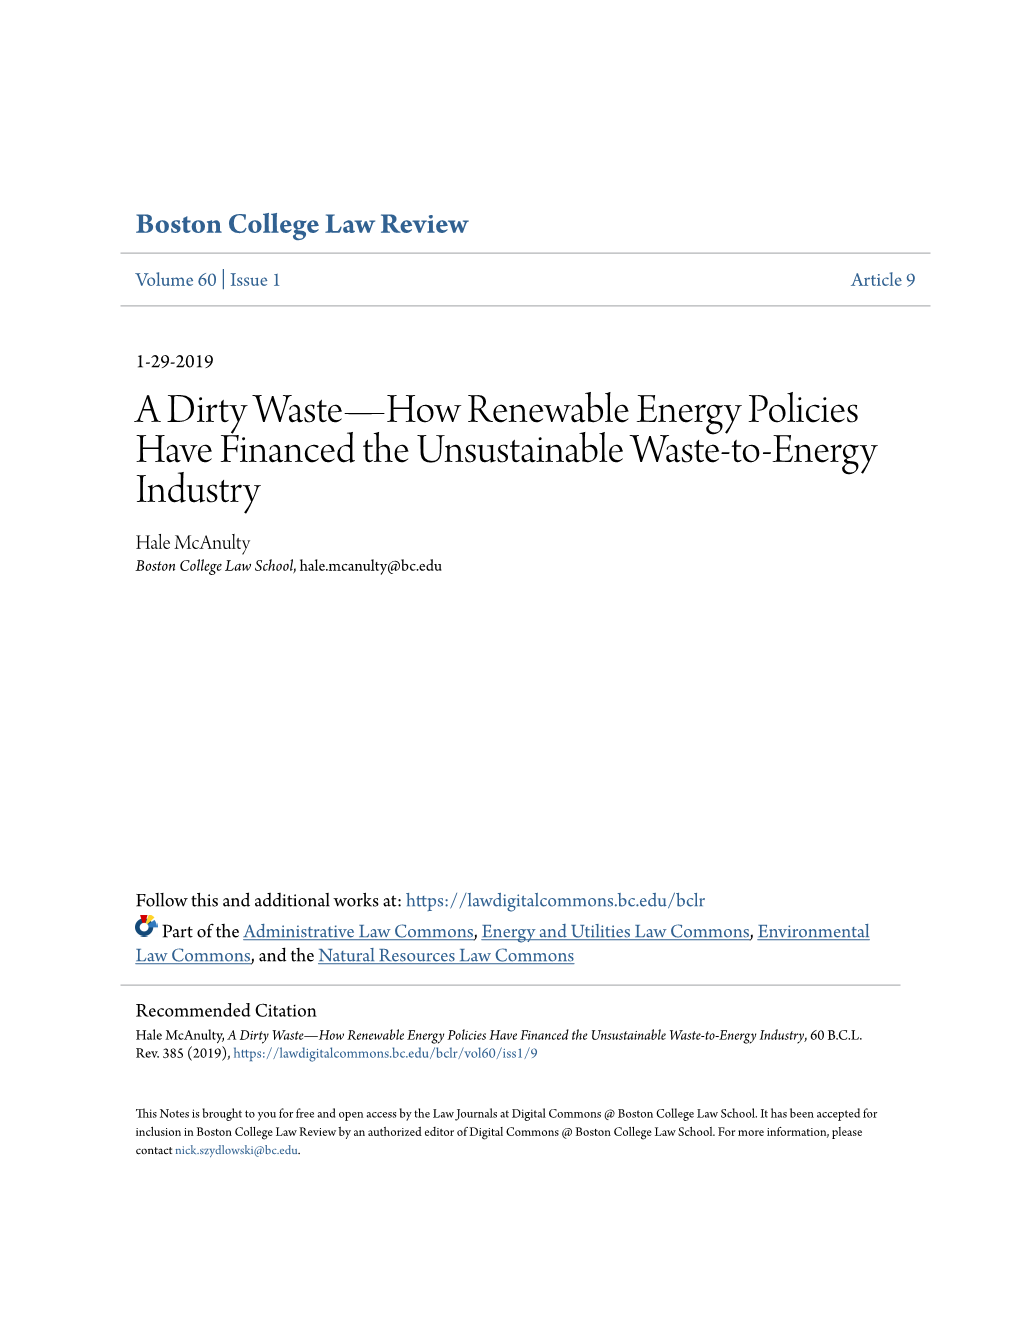 A Dirty Wasteâ•Flhow Renewable Energy Policies Have Financed The